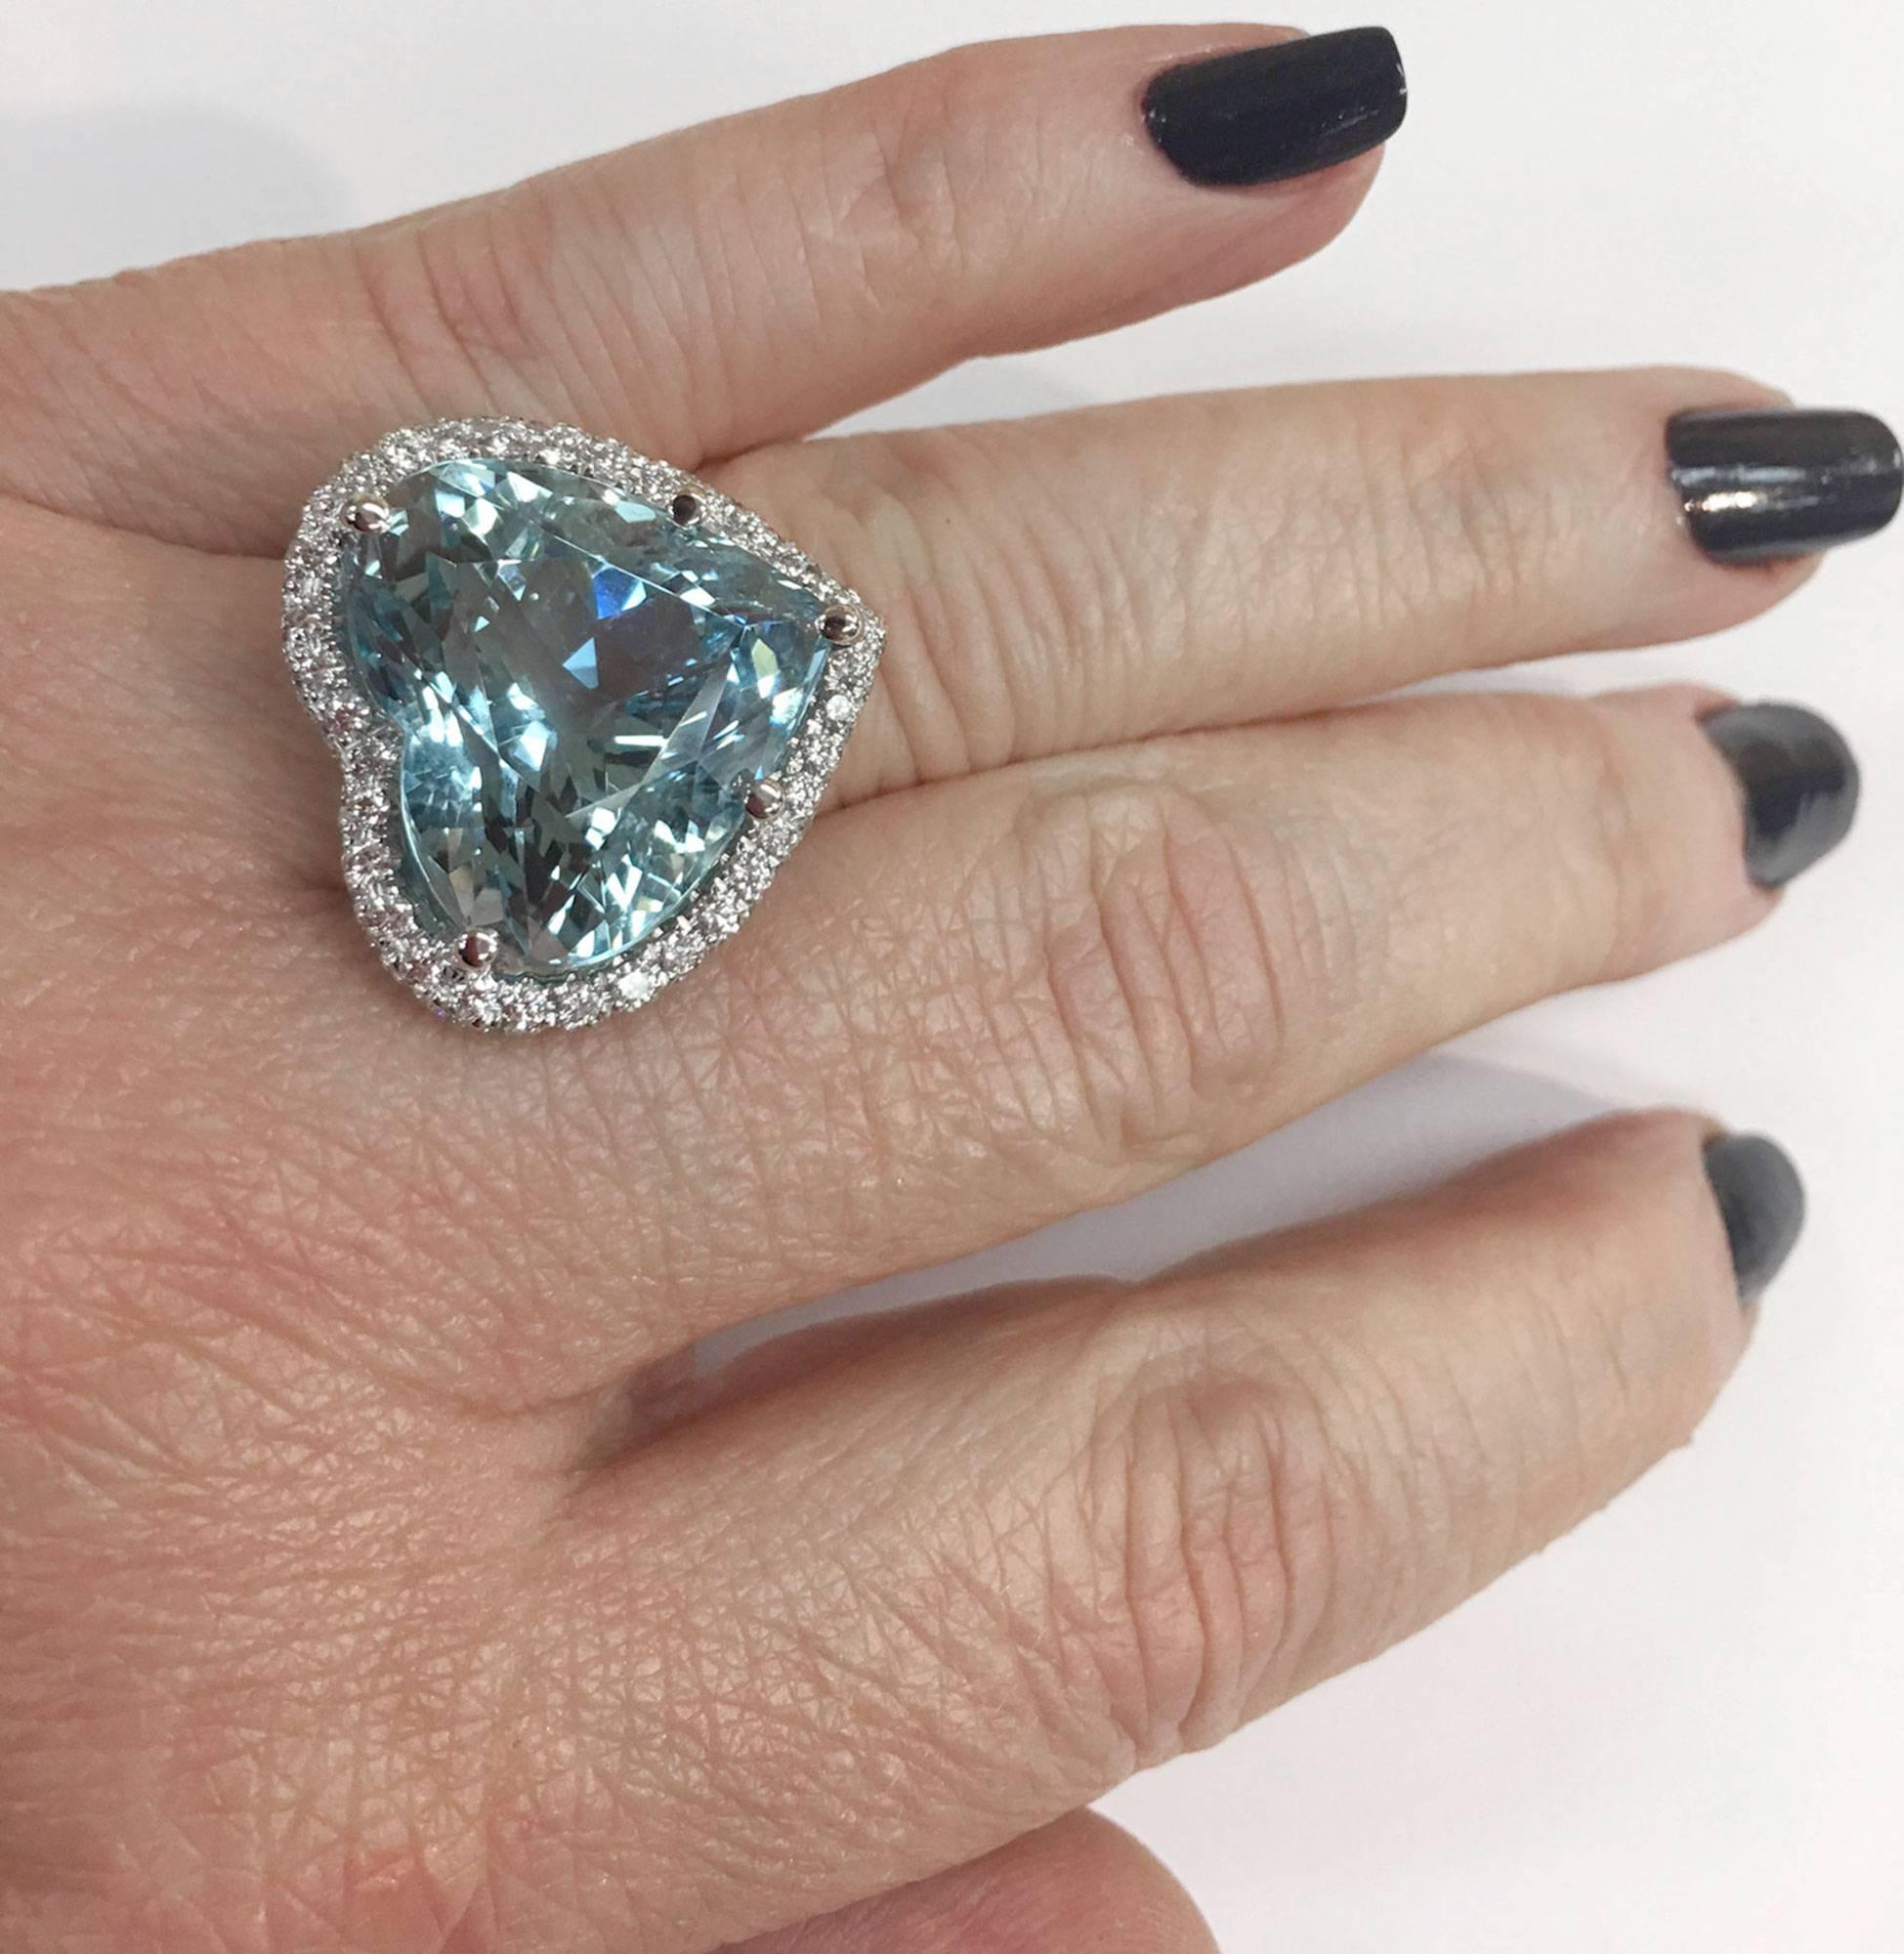 Elegant & finely detailed Natural Aquamarine Heart shaped Ring surrounded by 160 brilliant round cut diamonds in a beautifully handmade 18 karat white gold setting . Great attention to detail! The Aquamarine has rolling sparkle! 1 Heart shaped